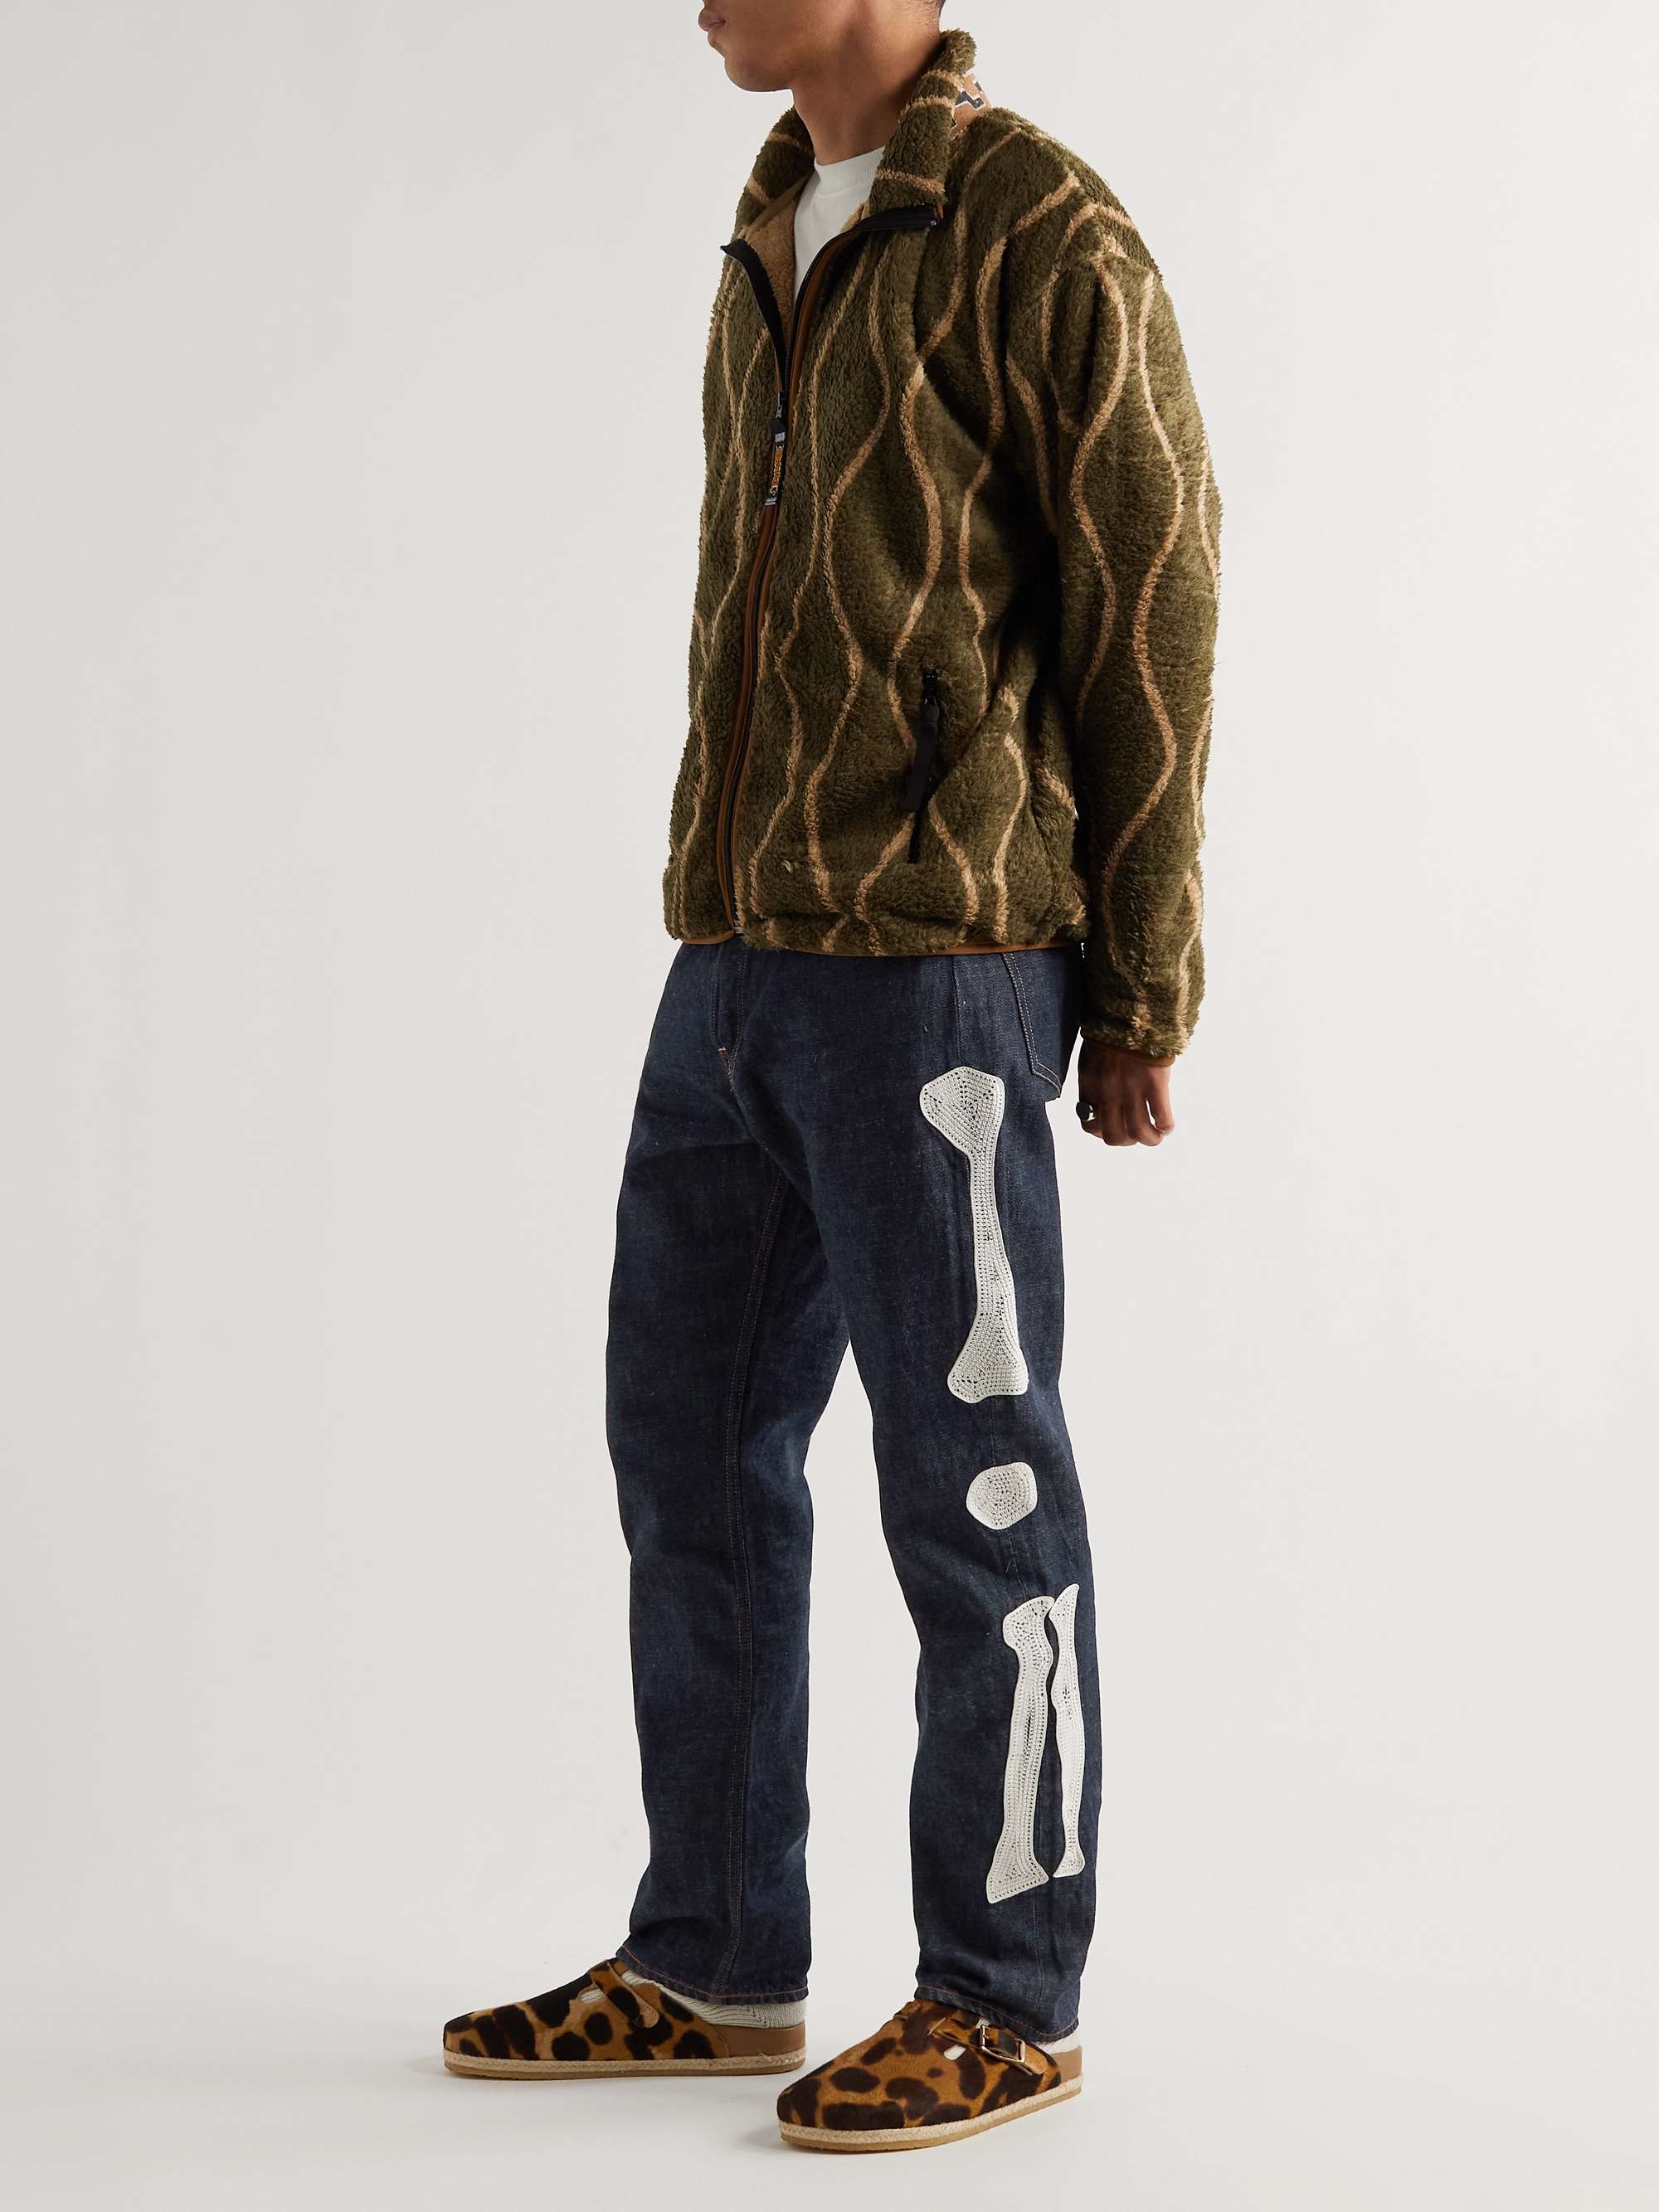 KAPITAL Embroidered Jeans